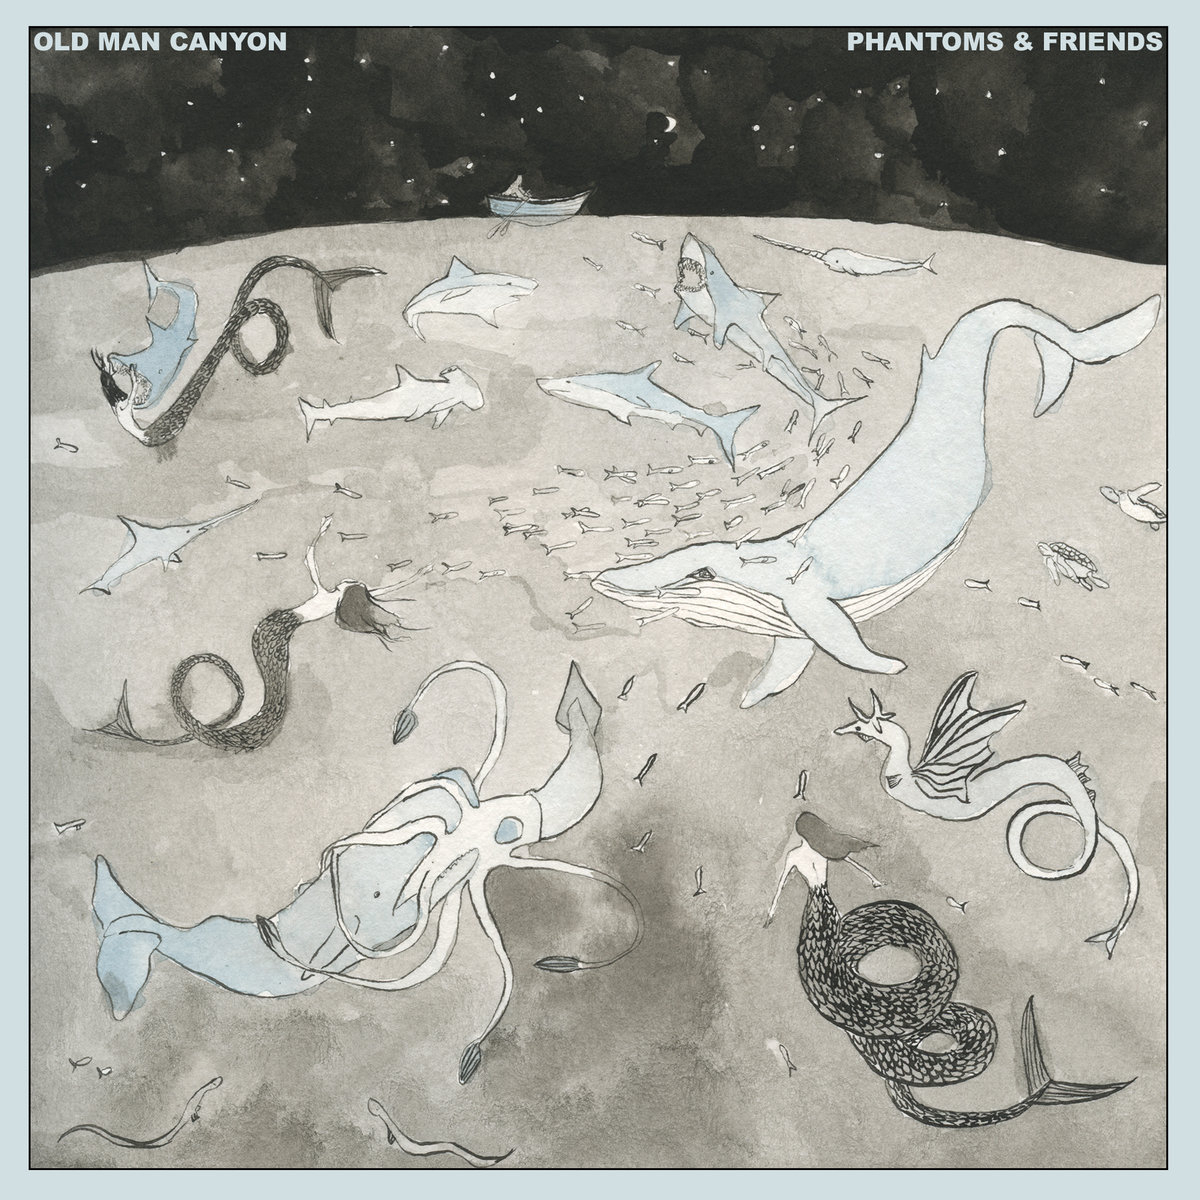 Now Playing: Old Man Canyon – Phantoms & Friends